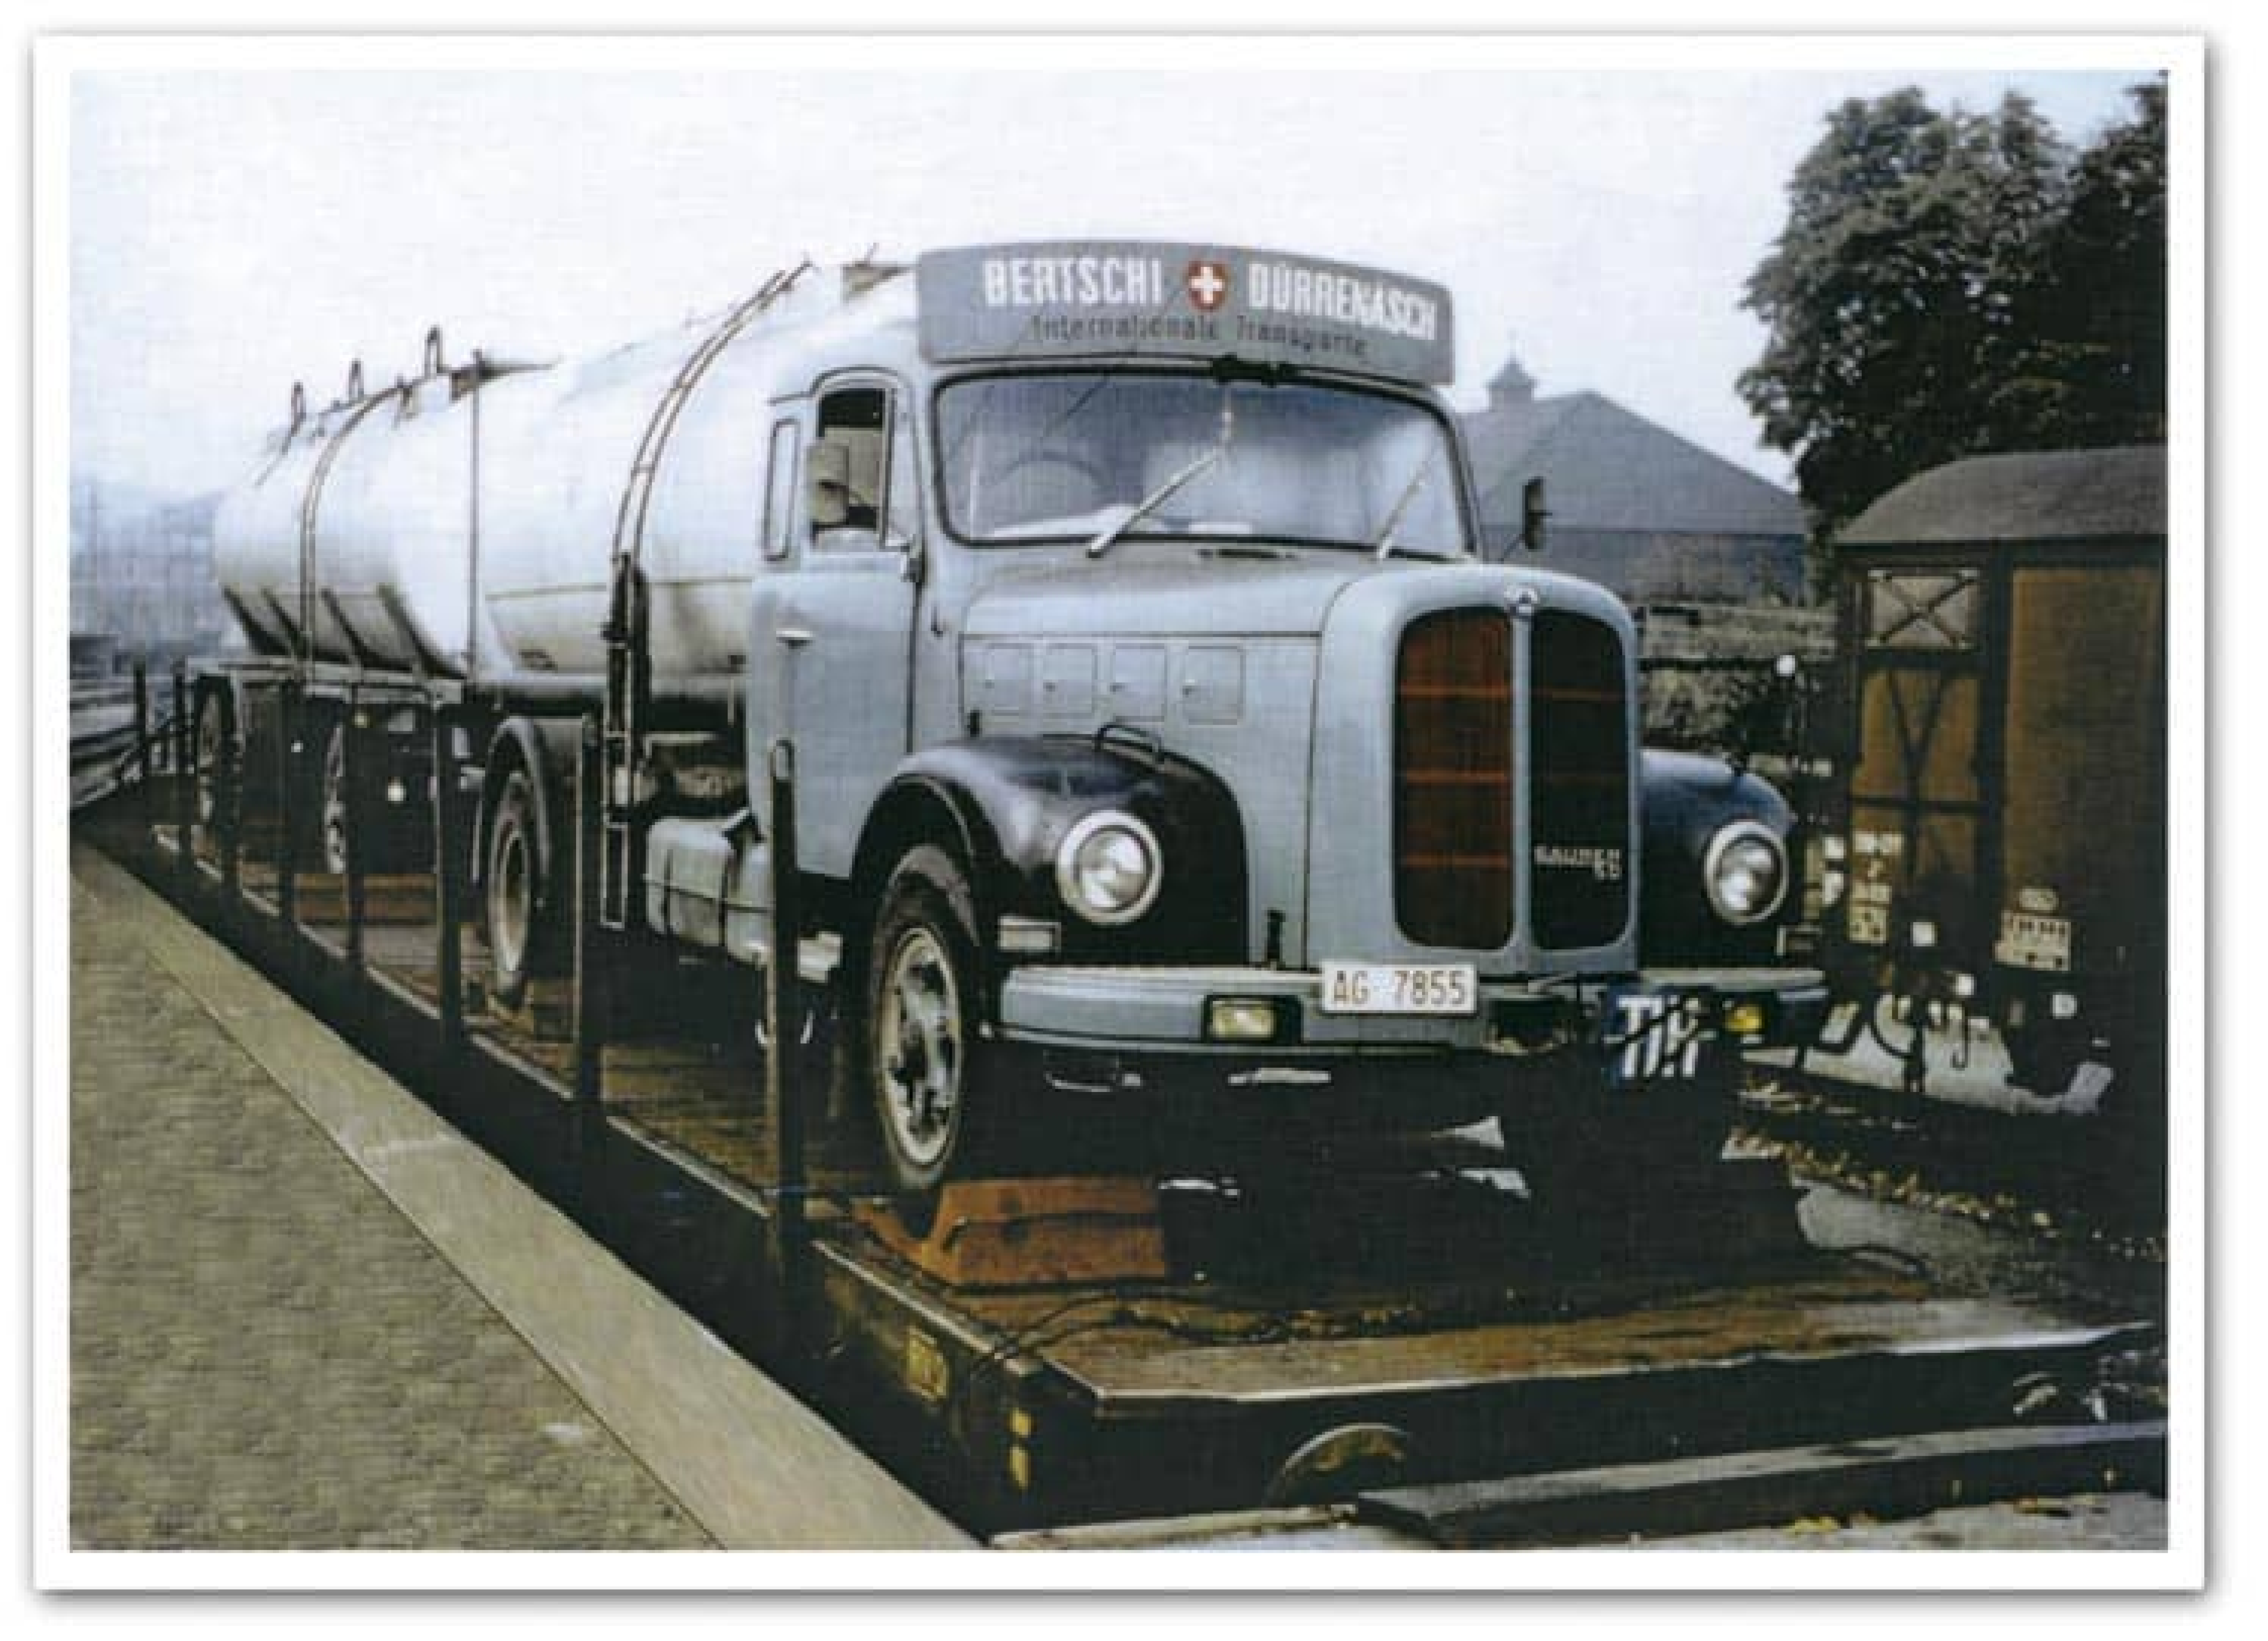 The first tanker Truck that was loaded onto a railway, with a lightblue color.